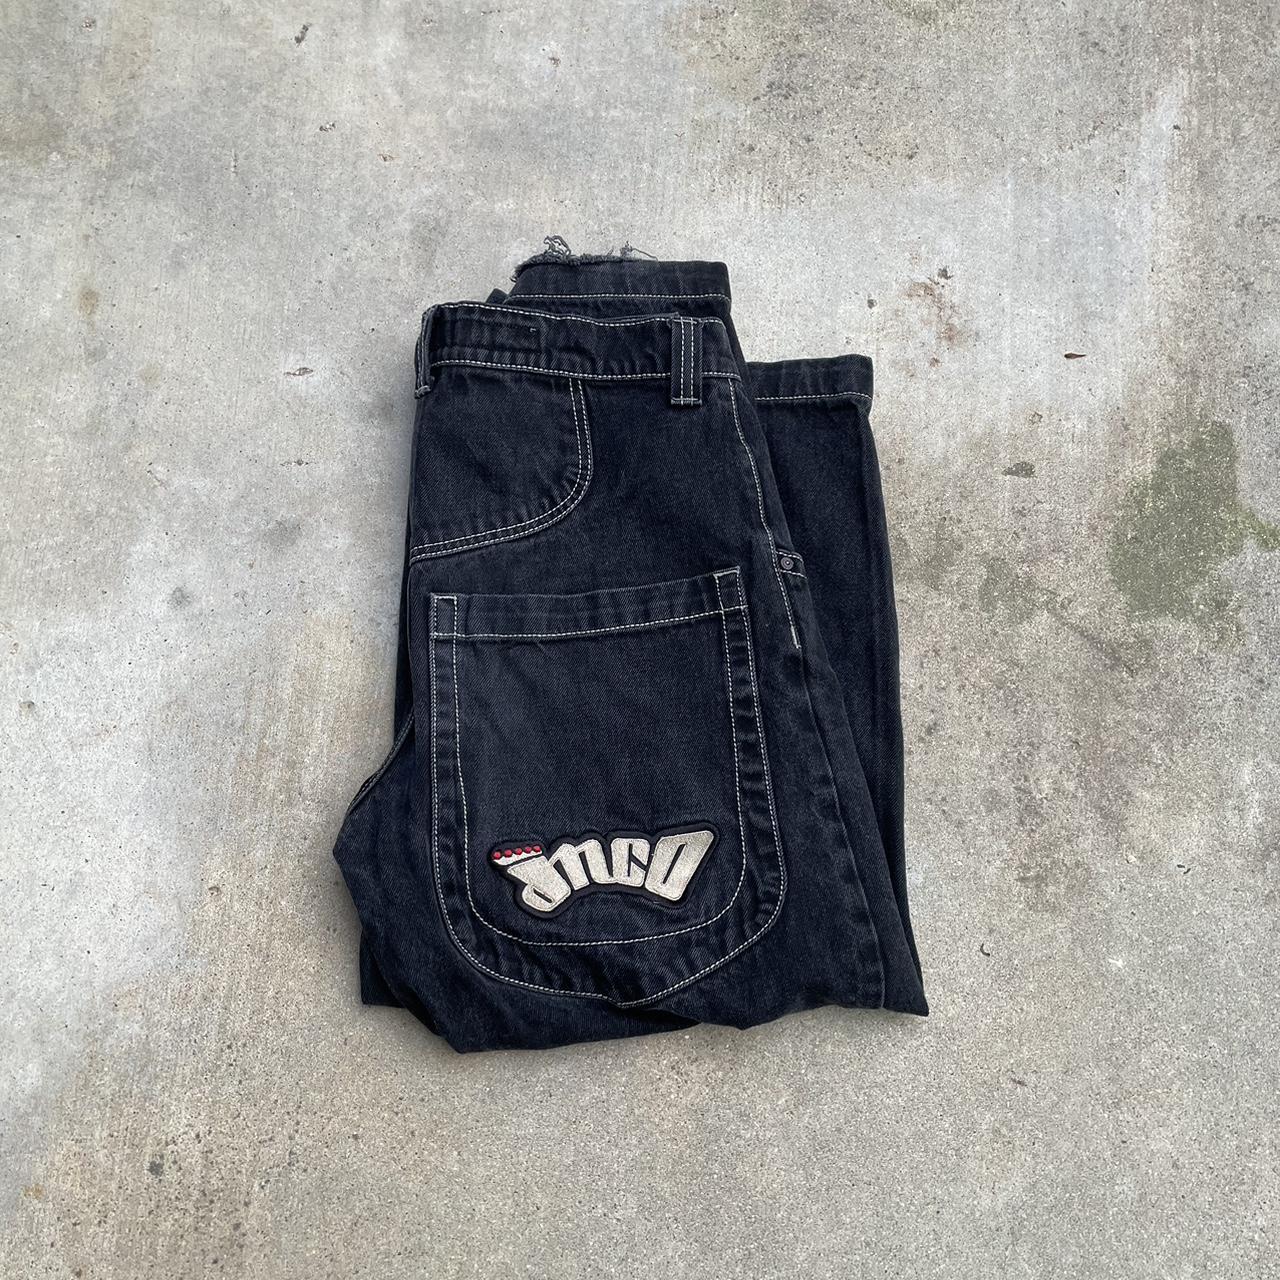 DO NOT BUY!!! just listed 6 jncos on my page and... - Depop